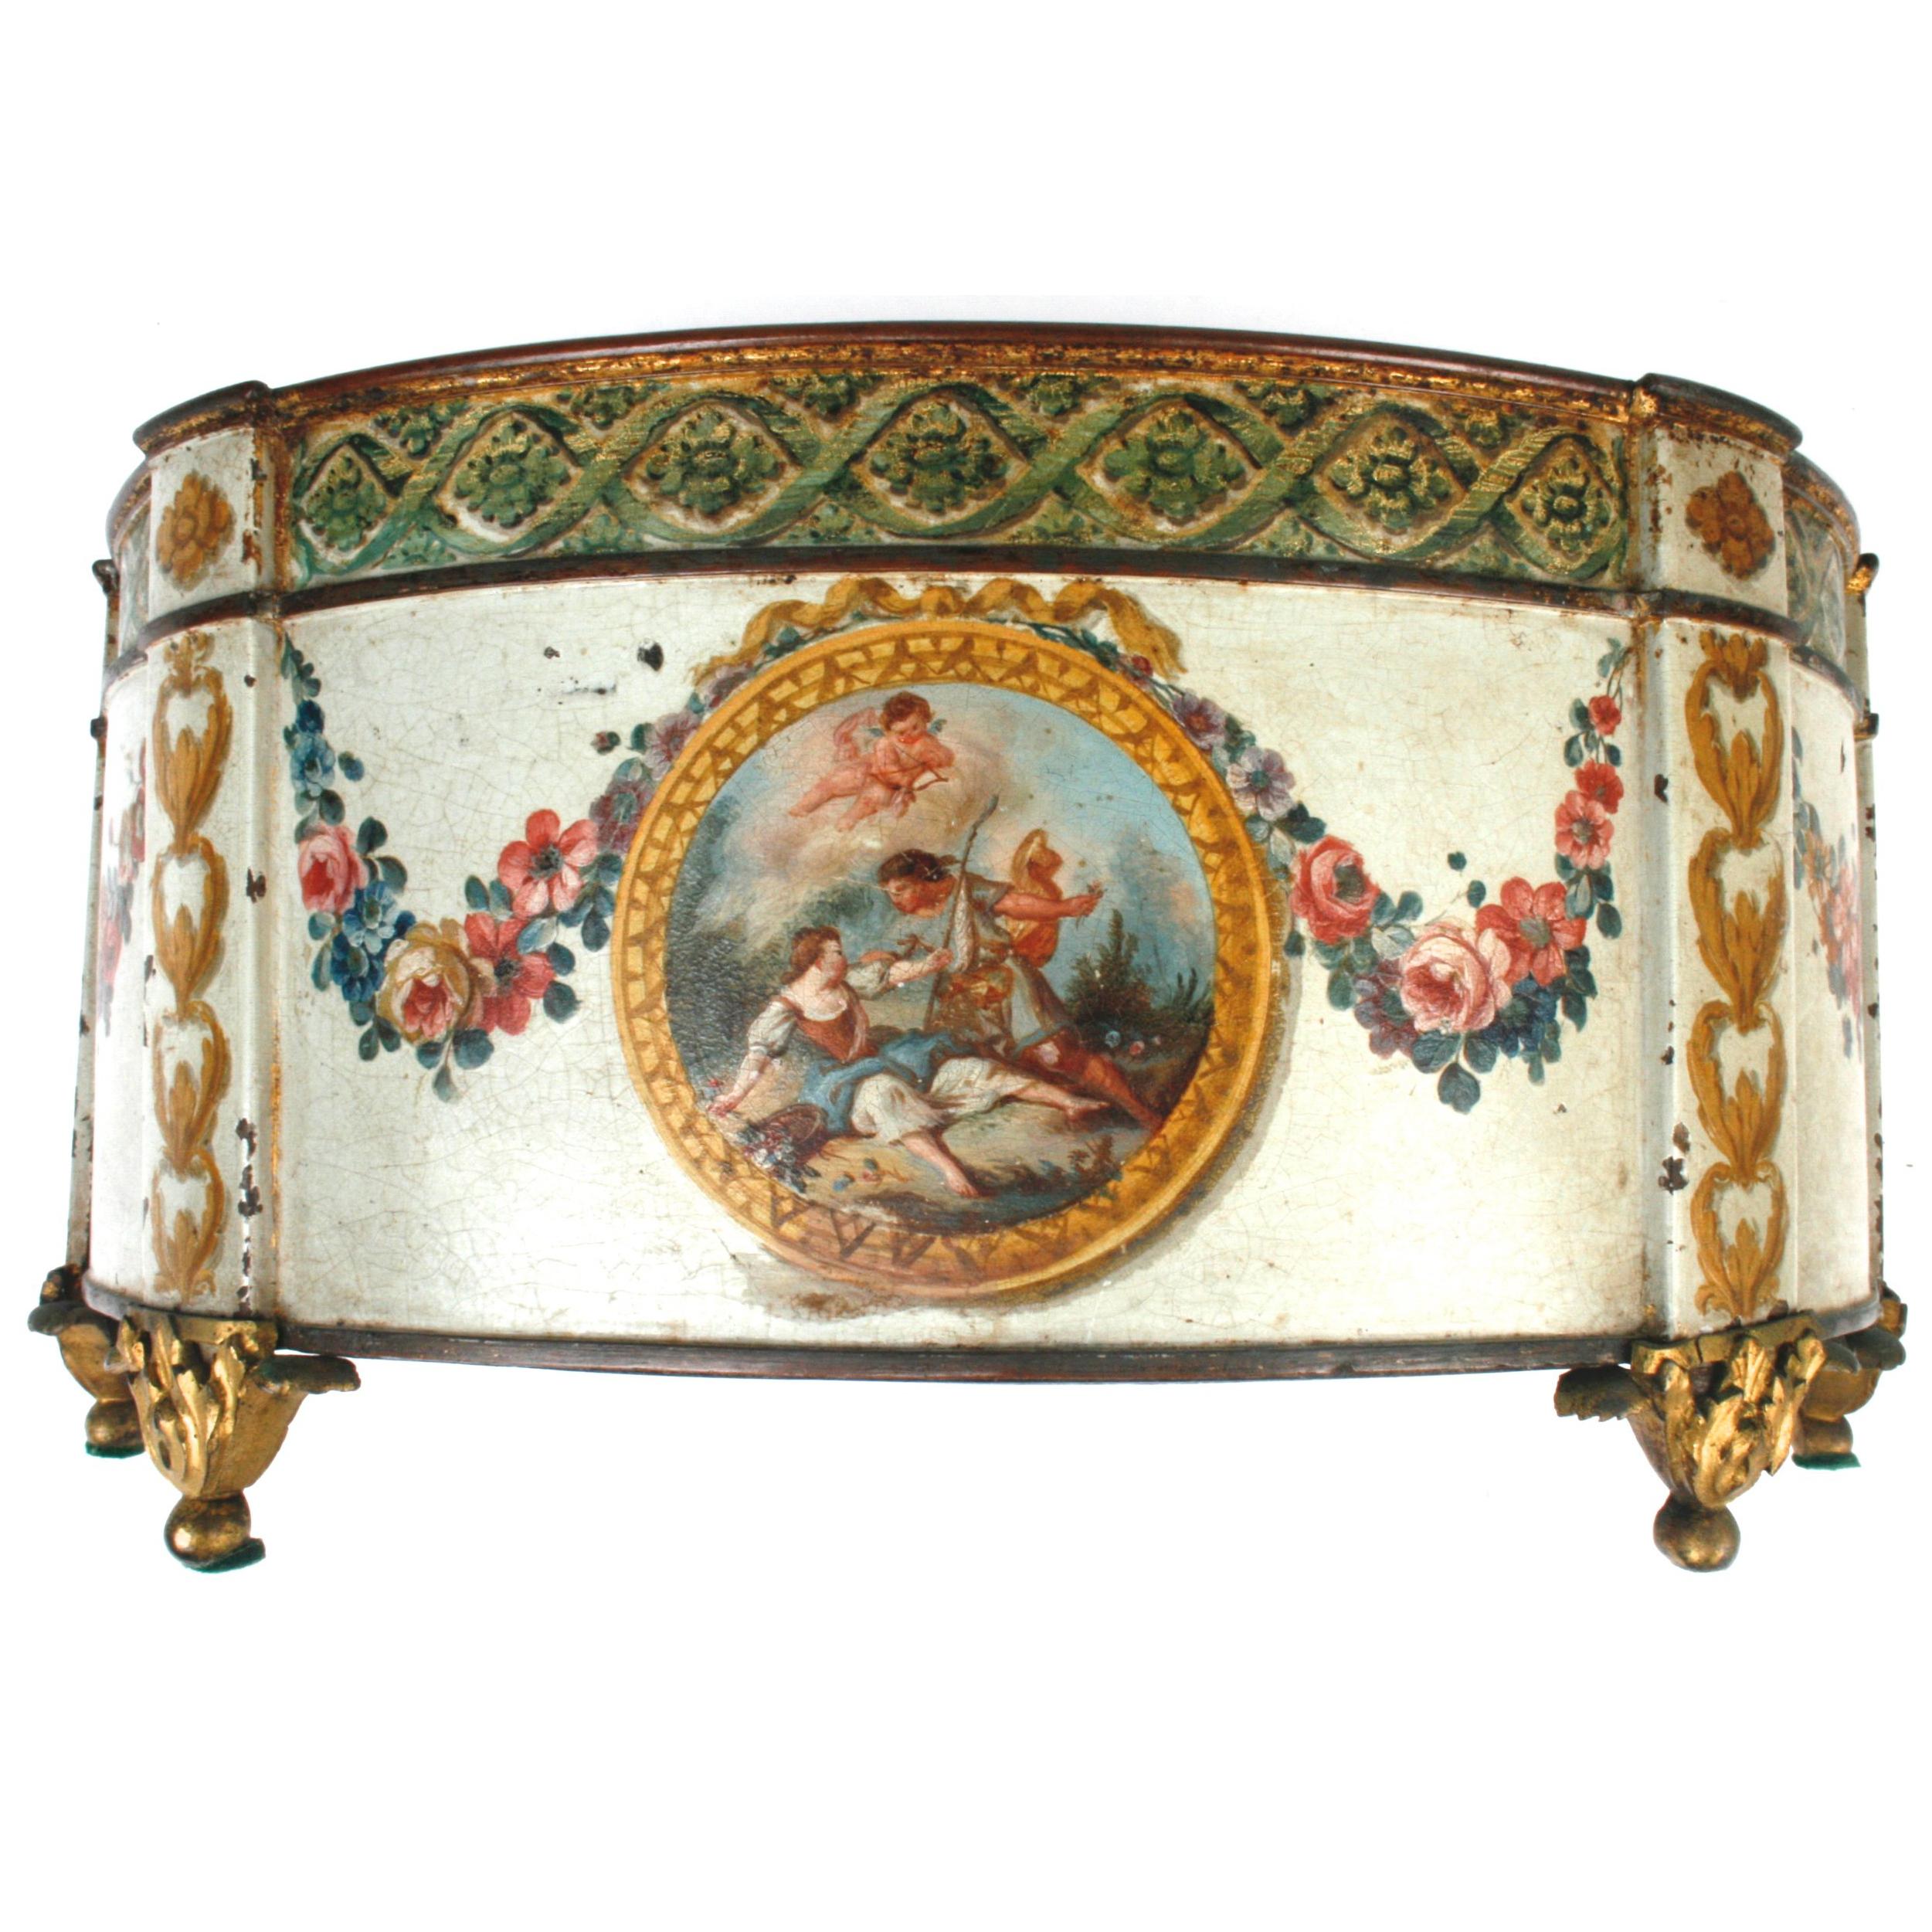 Louis XVI Painted and Gilt Decorated Tole Cachepot, c1780